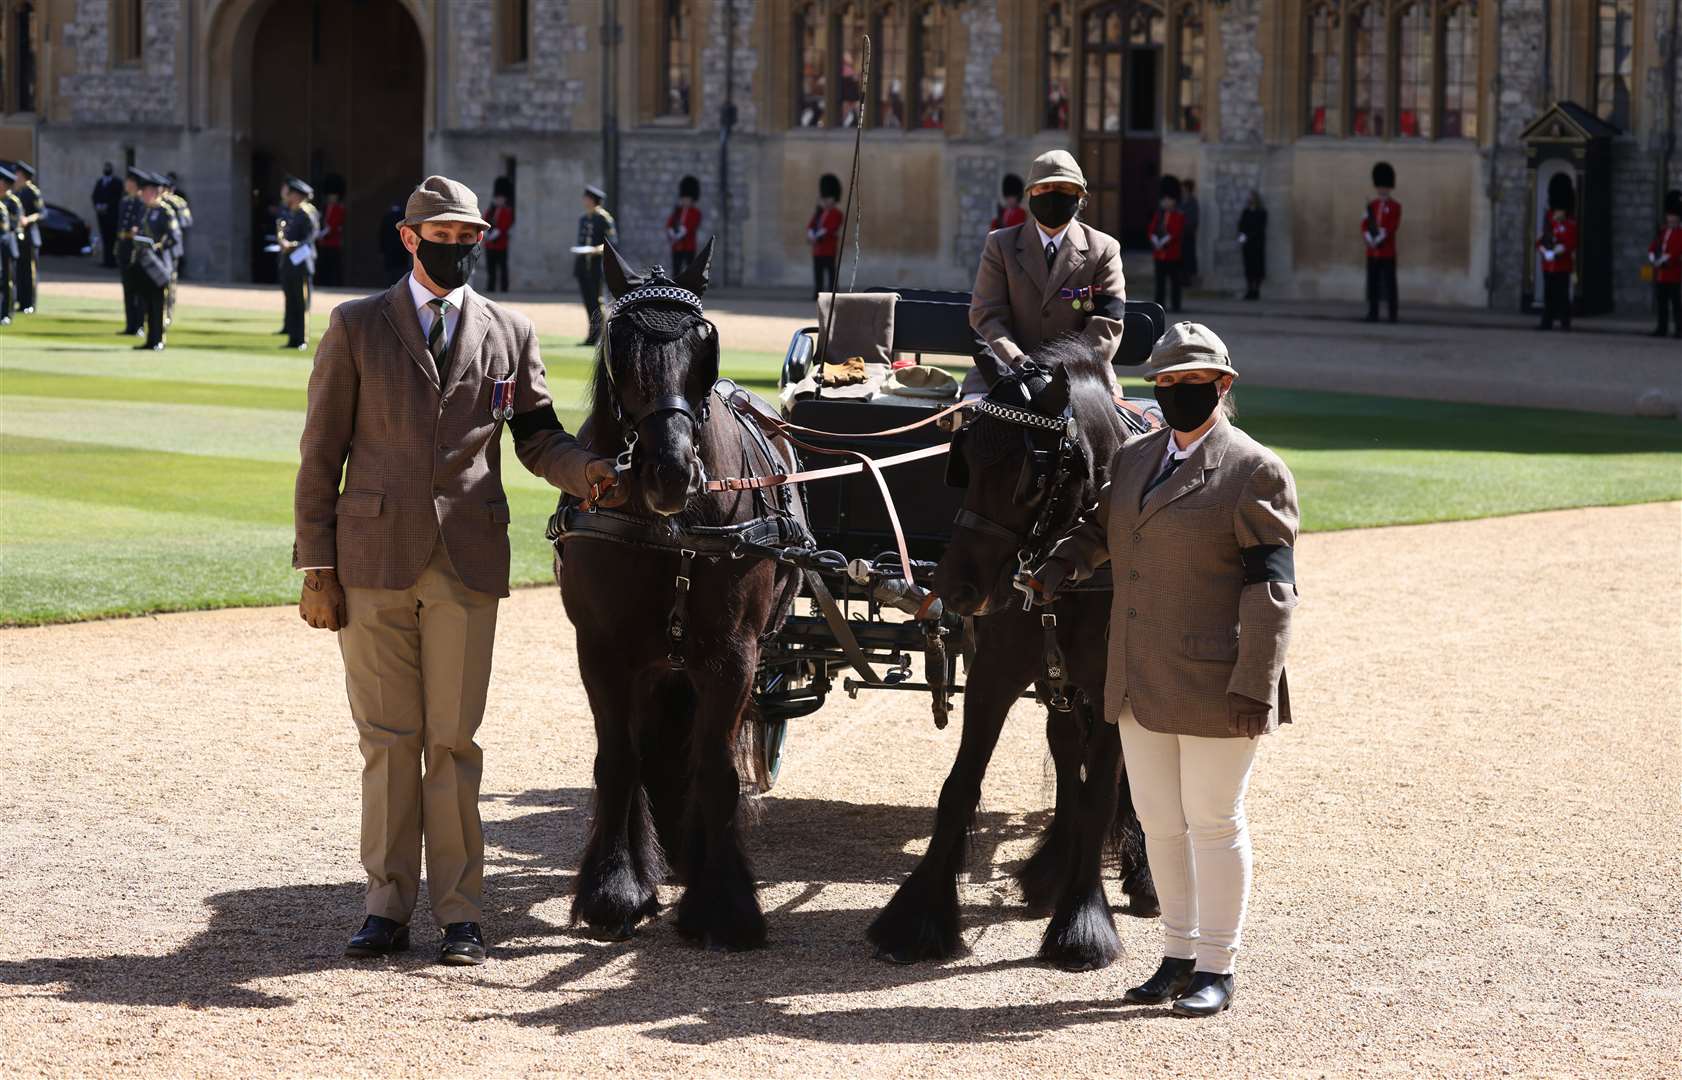 Fell ponies Balmoral Nevis and Notlaw Storm and the Duke of Edinburgh’s driving carriage in the Quadrangle of Windsor Castle (Ian Vogler/Daily Mirror/PA)